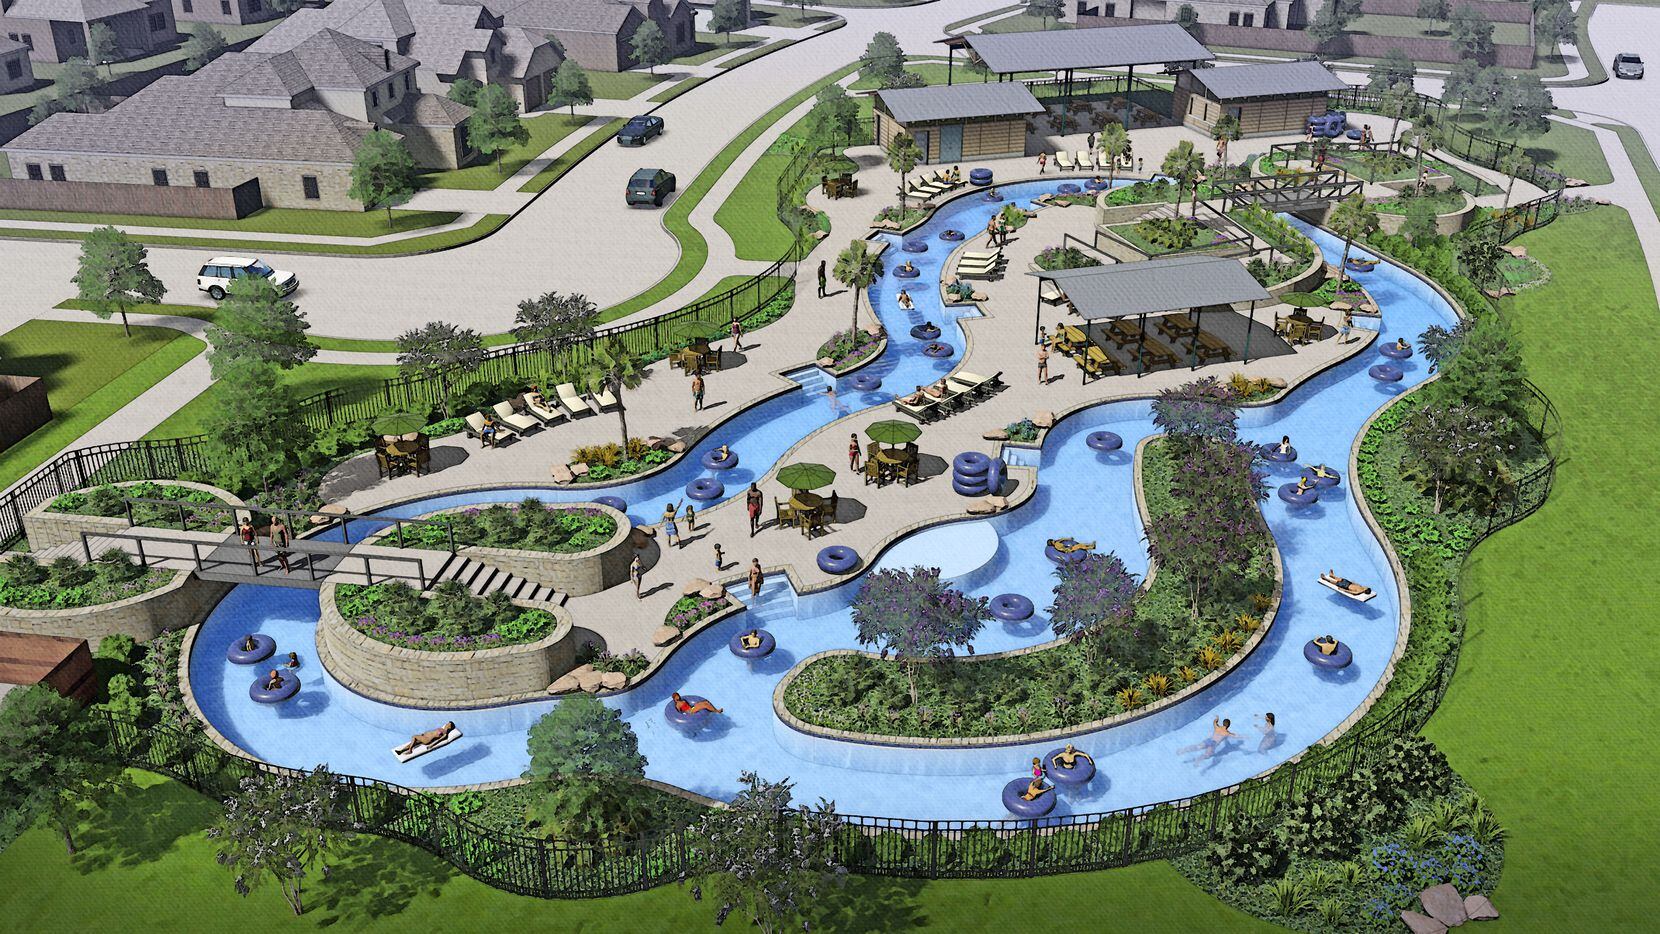 Developer Hines' 1,100-acre Wildflower Ranch residential community will include a lazy river...